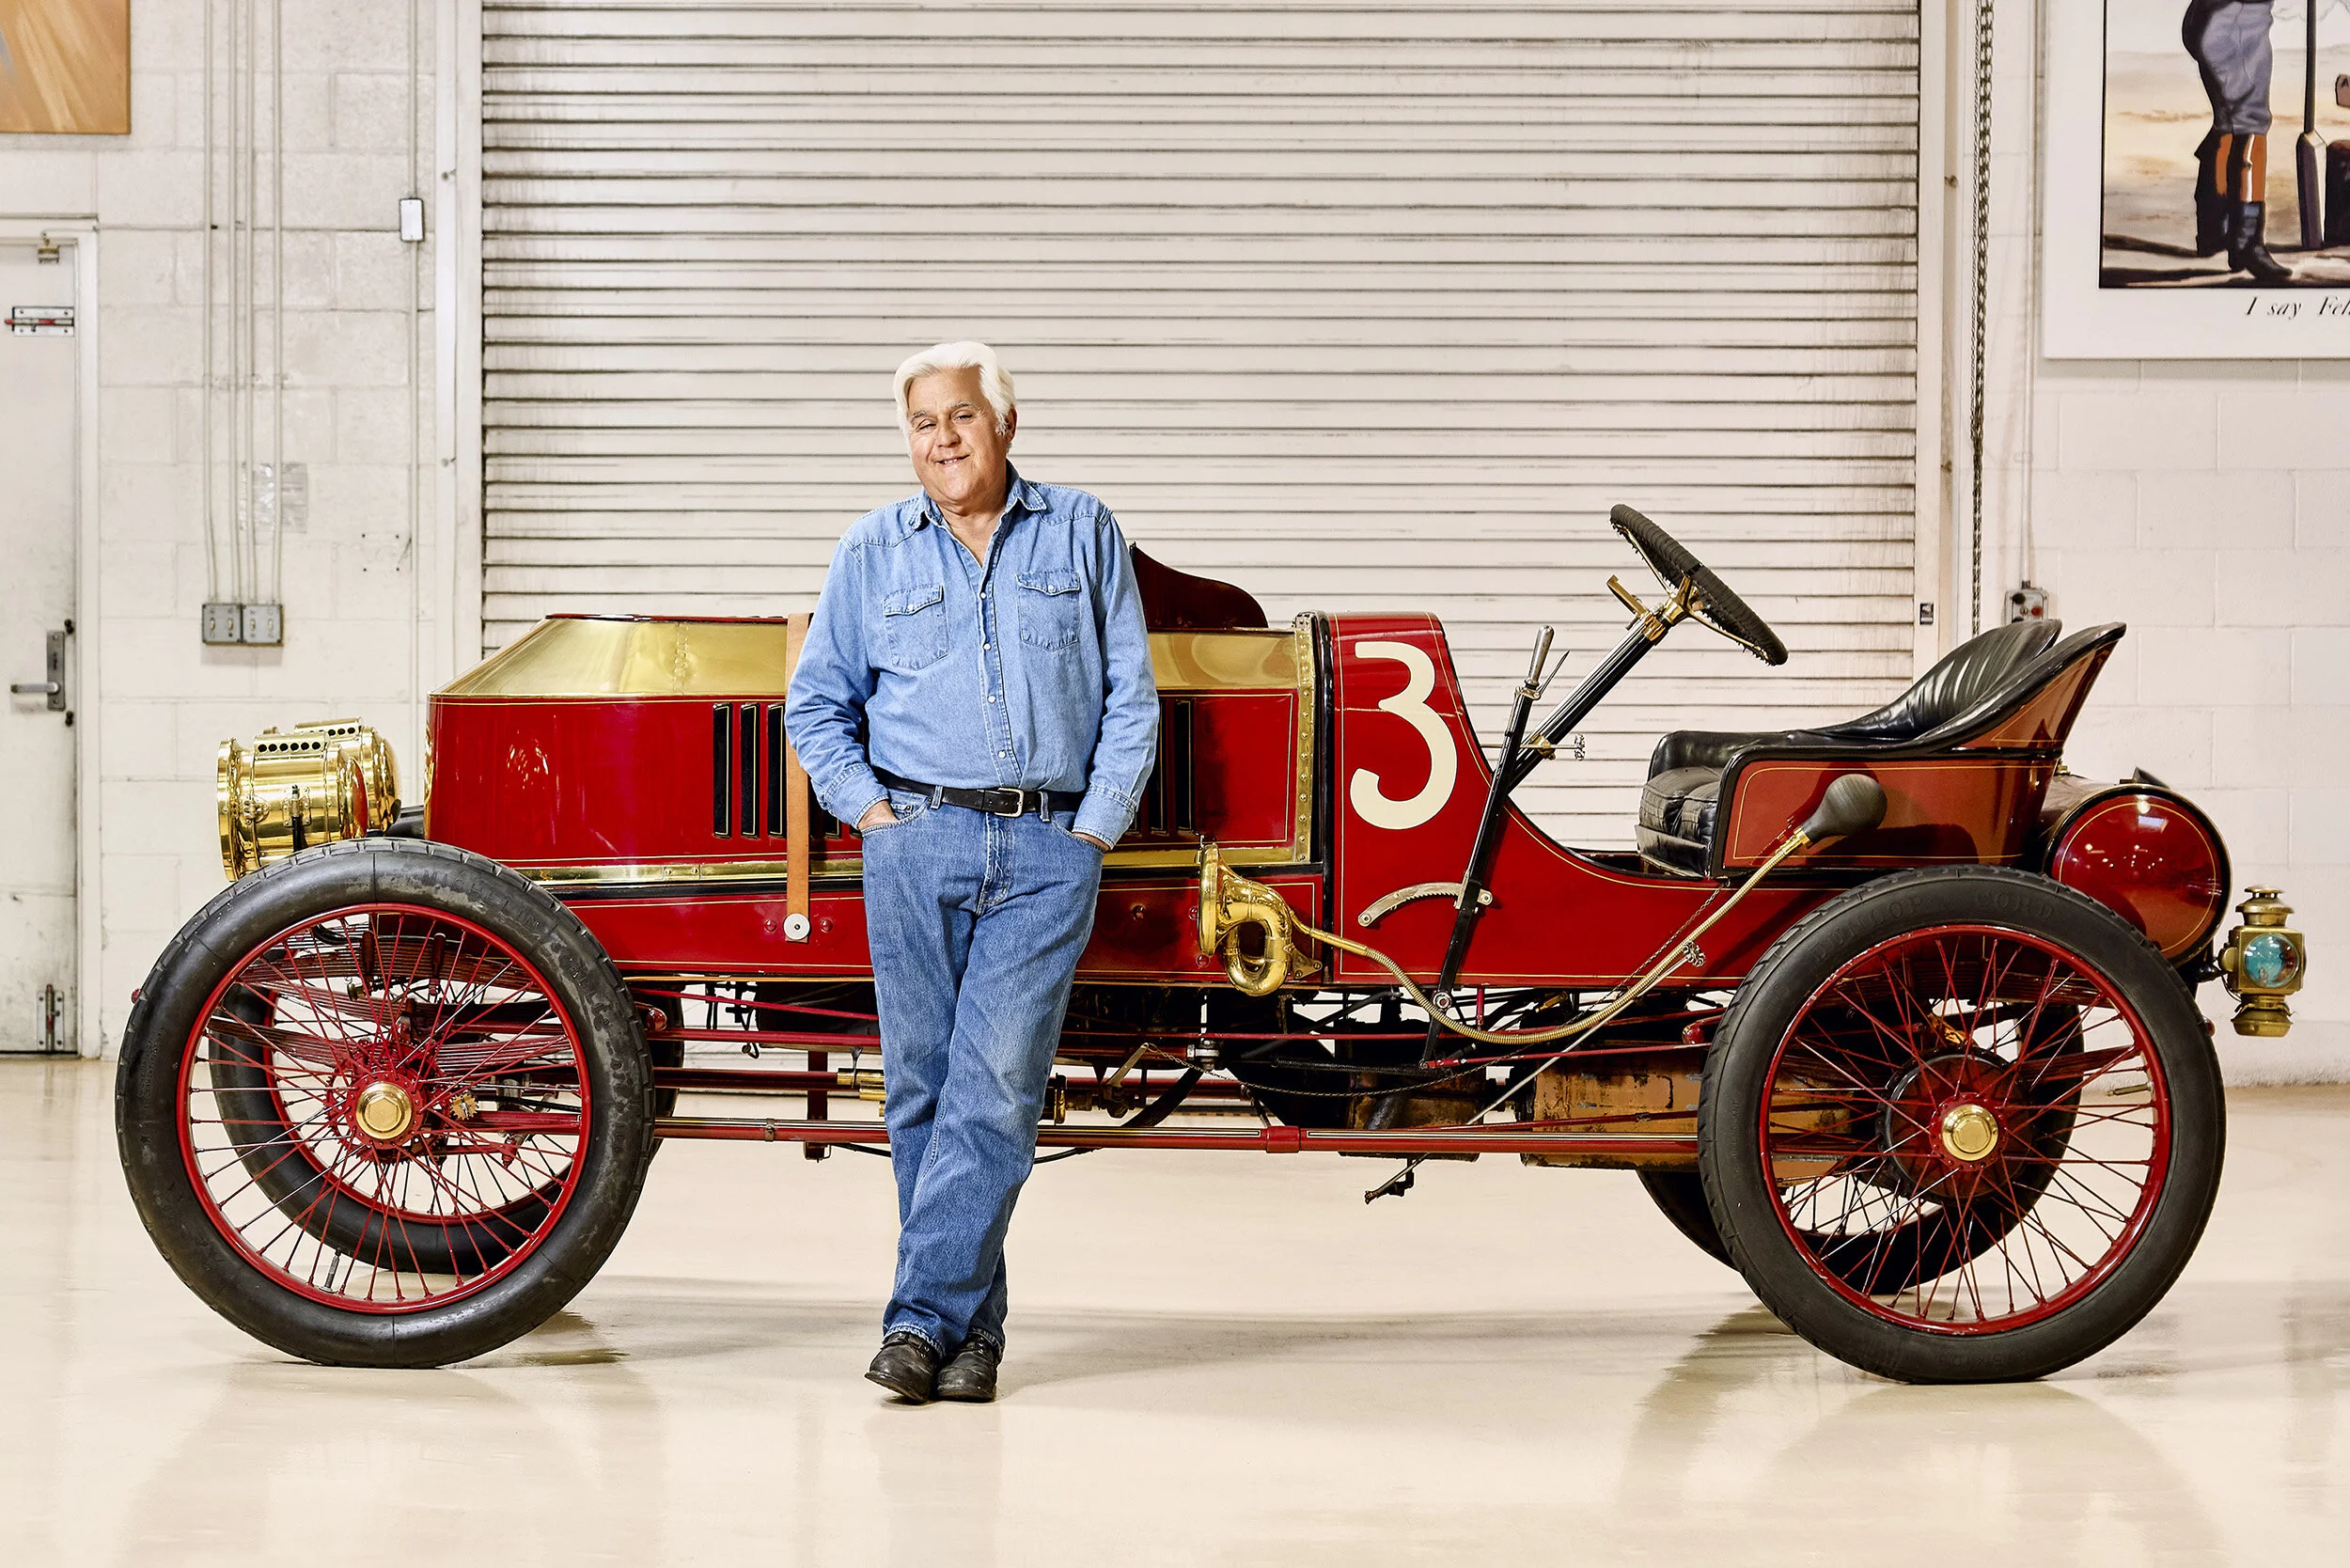 Business F1 Top 20 Petrolheads: Jay Leno, King of Late Night Laughter image